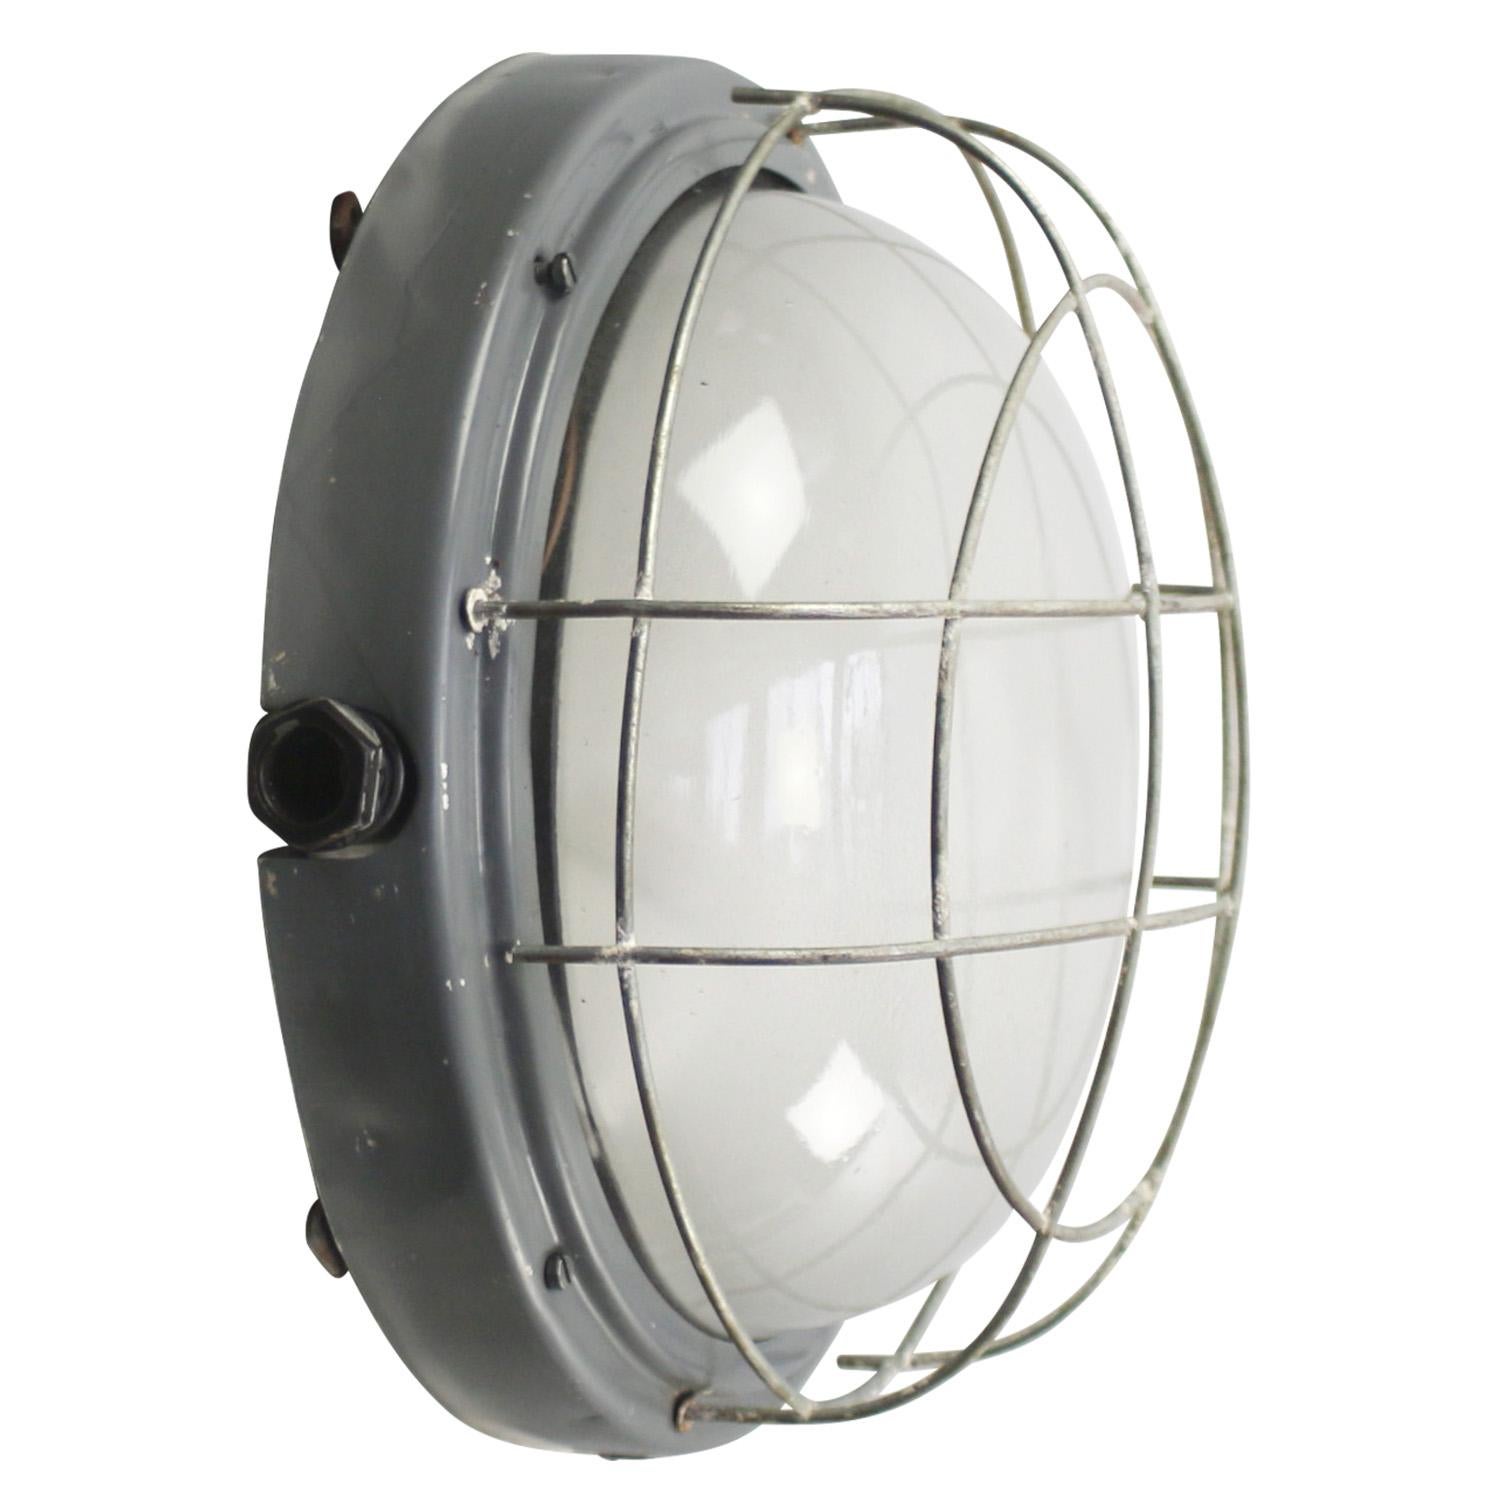 Industrial wall and ceiling scone. Grey aluminium.
Frosted glass. Double bulb holder.

Weight: 2.00 kg / 4.4 lb

Priced per individual item. All lamps have been made suitable by international standards for incandescent light bulbs, energy-efficient